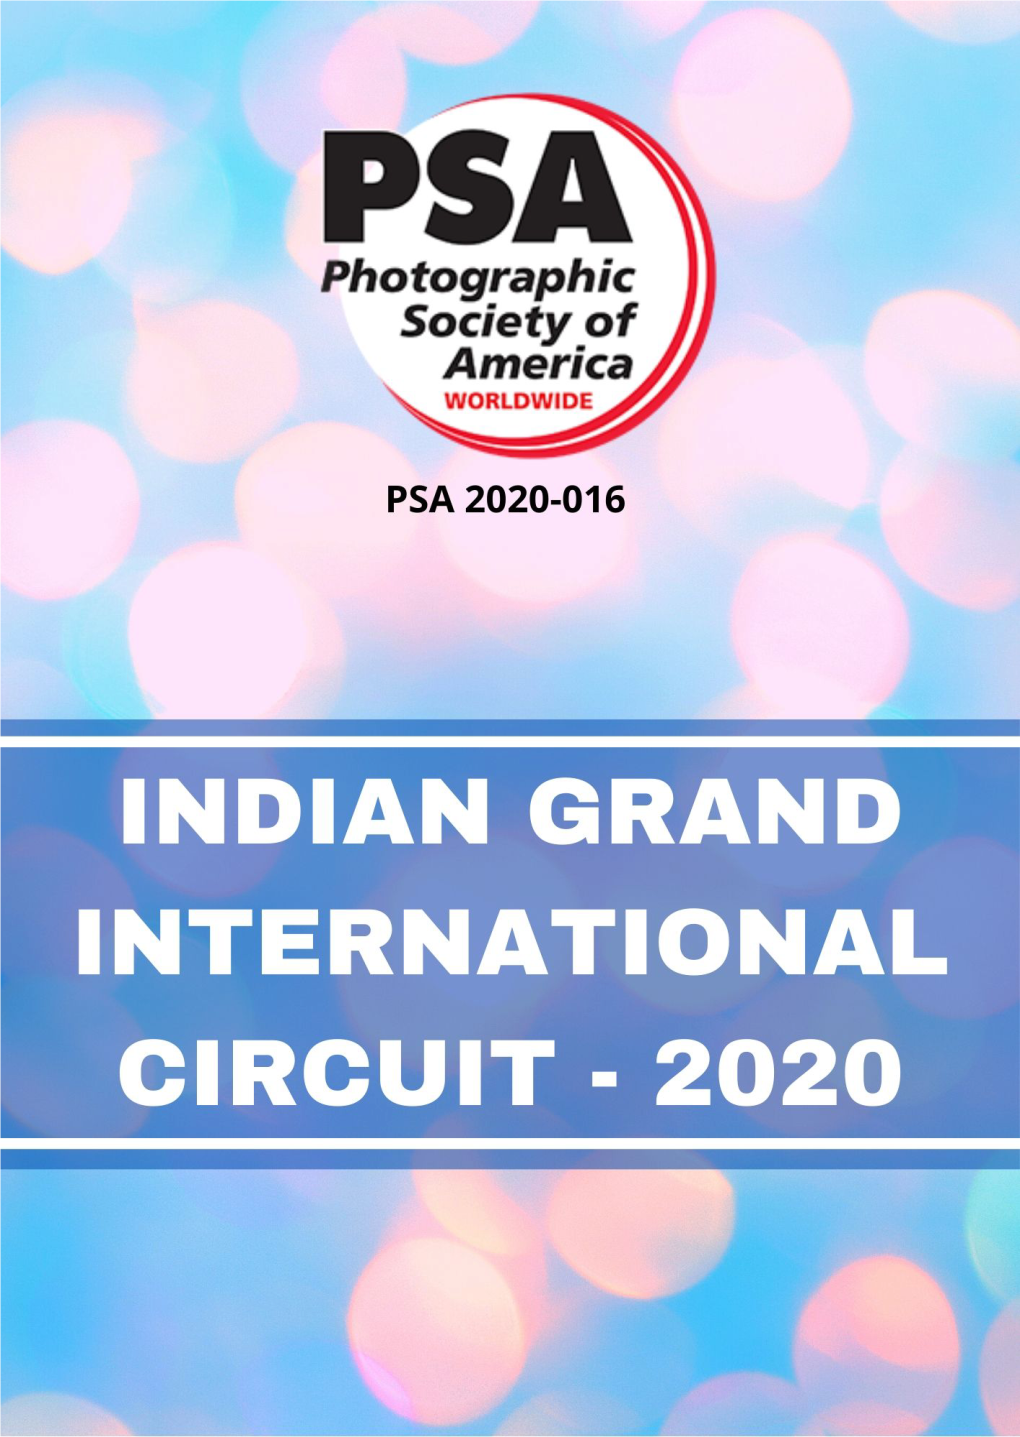 INDIAN GRAND INTERNATIONAL CIRCUIT 2020 | Awarded Works - Open Monochrome IGC HM MEDAL, IGC GOLD - POSITIVE LONELINESS4849 by RAJAT DAWN (INDIA)